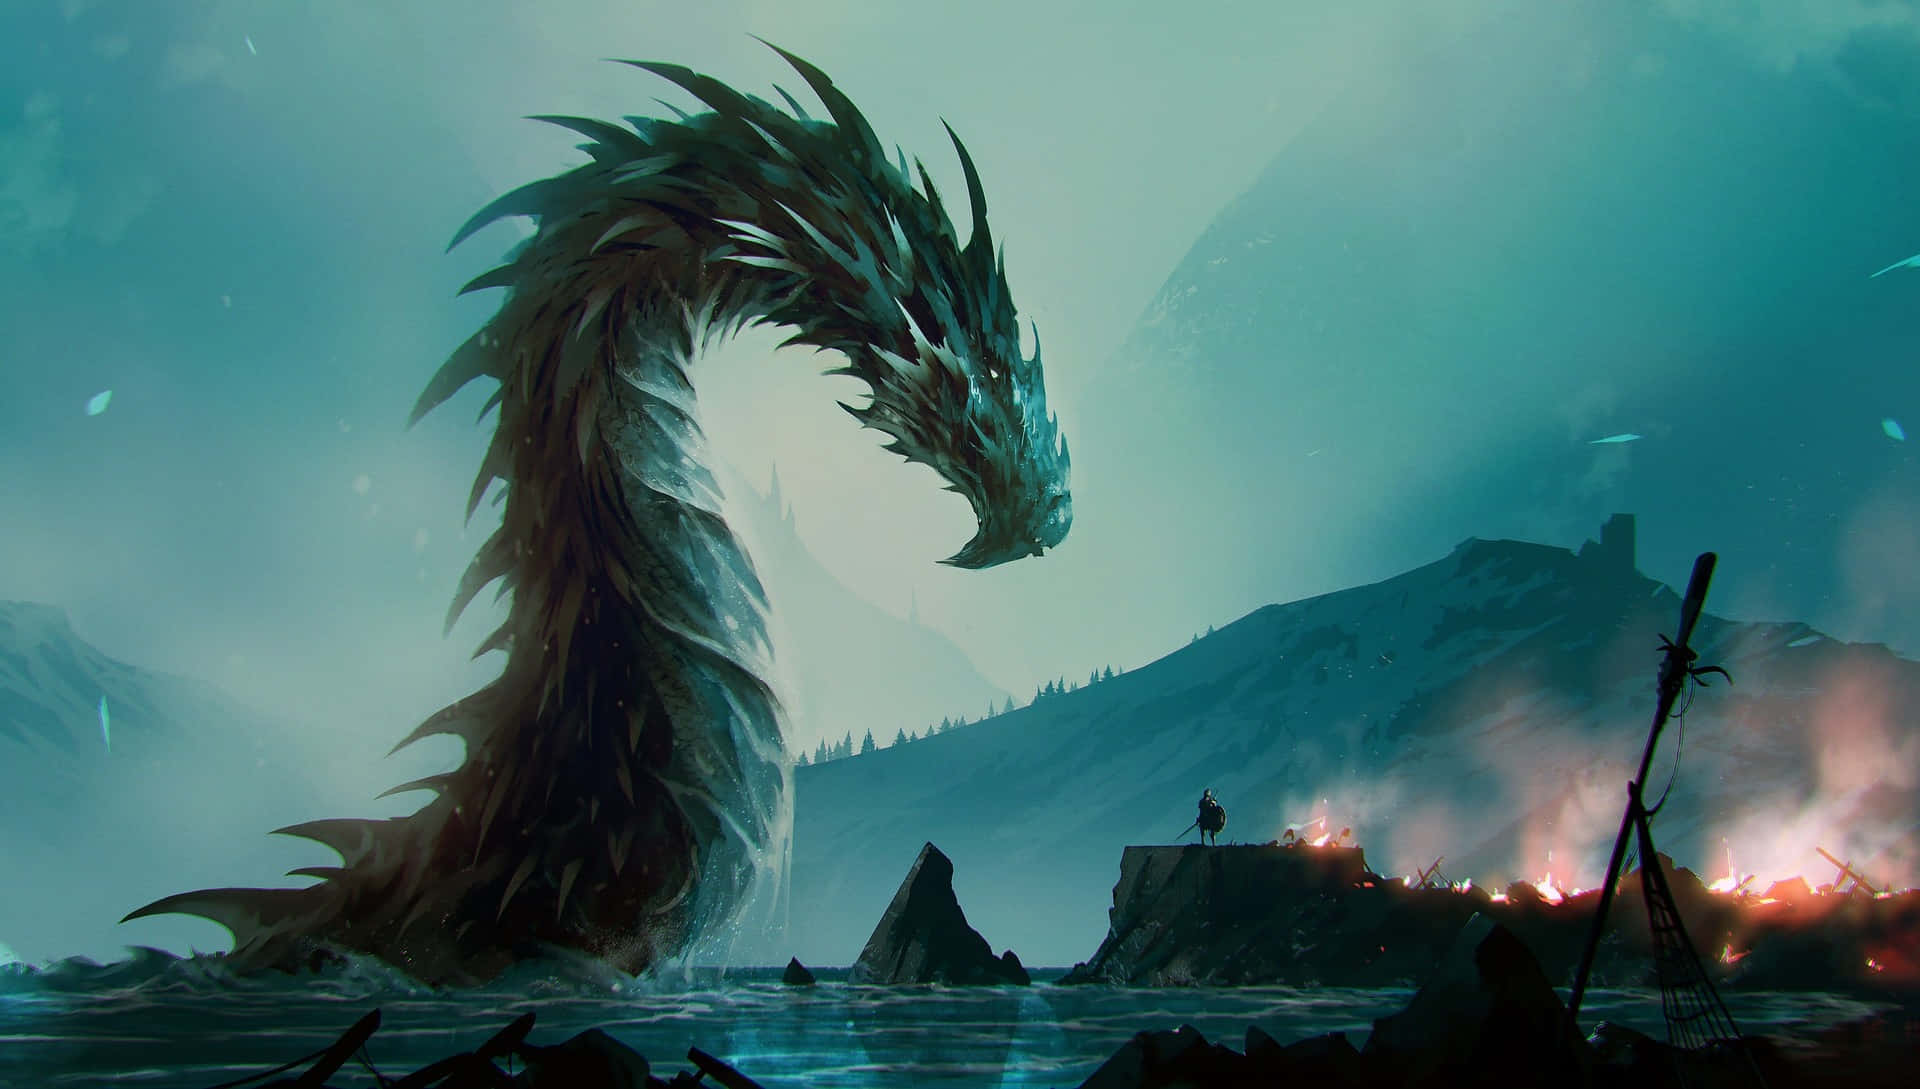 The Mystical Dragon of Myth and Legend Wallpaper